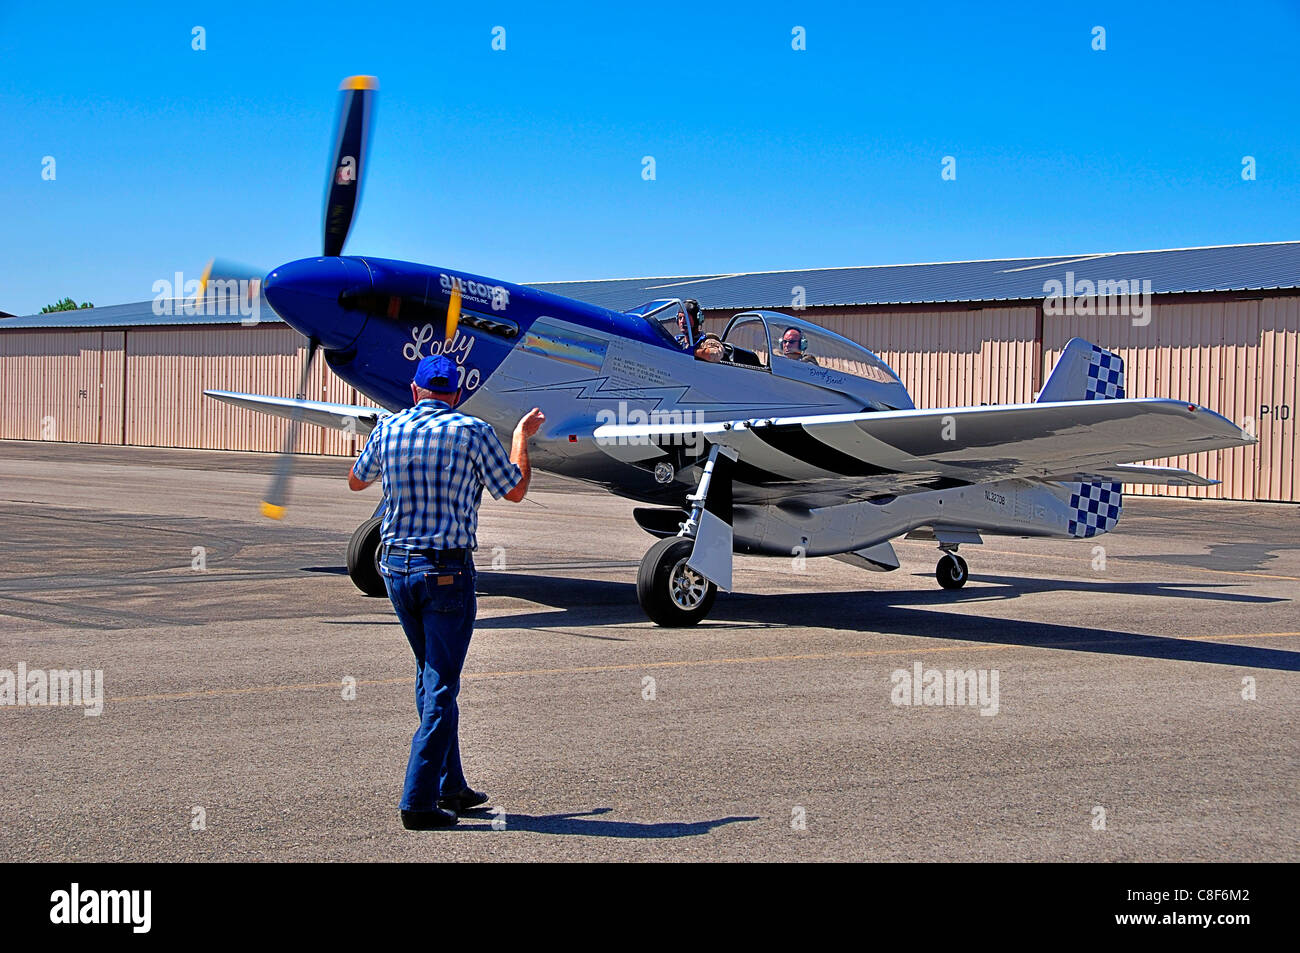 'Lady Jo', P-51D Mustang WW2 Fighter Aircraft taxiing at Nampa Airport Stock Photo